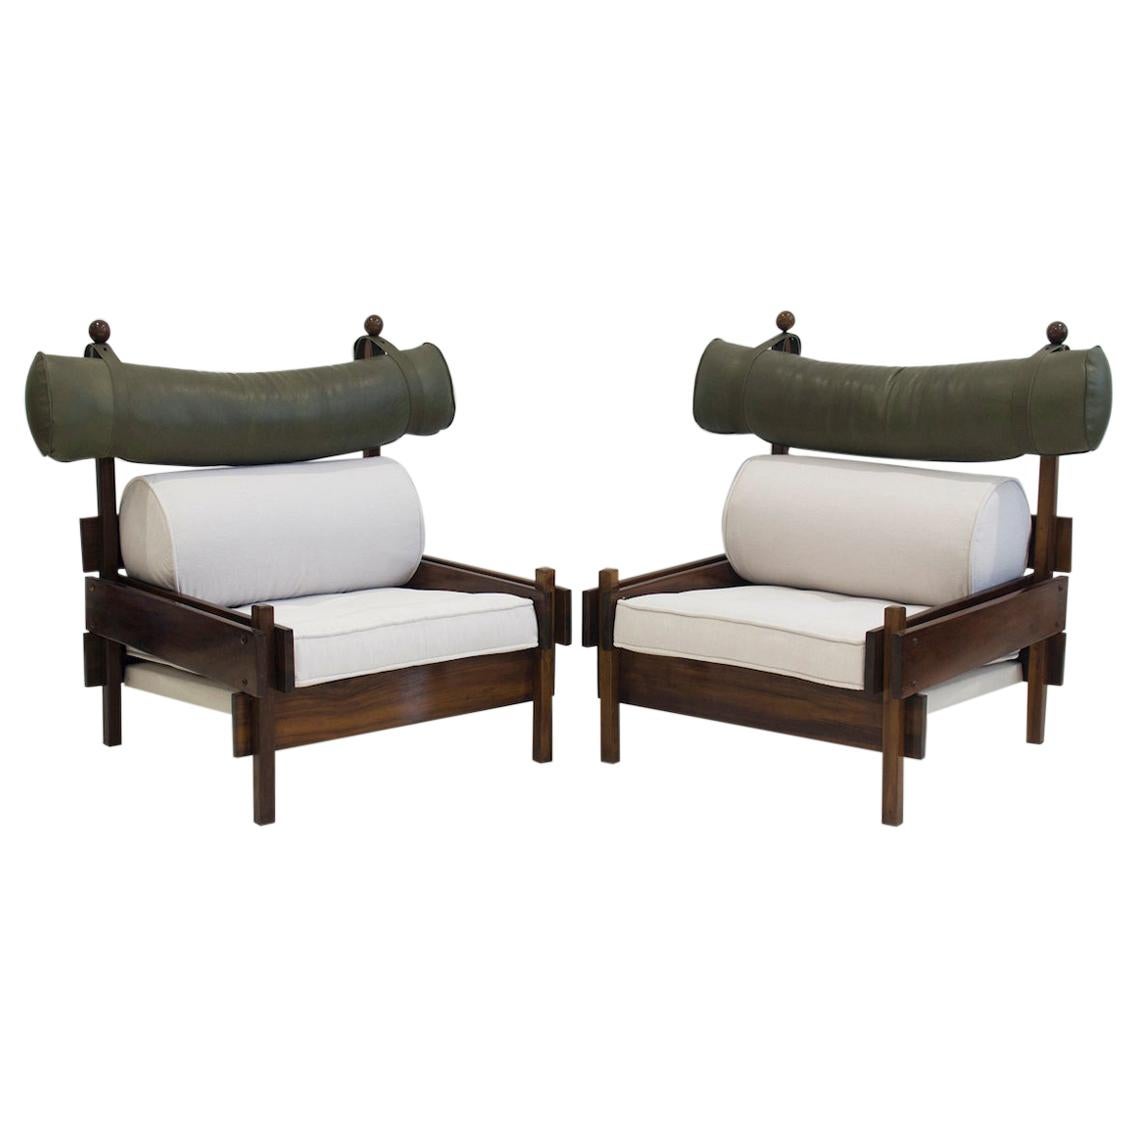 Pair of Sergio Rodrigues 'Tonico' Chairs